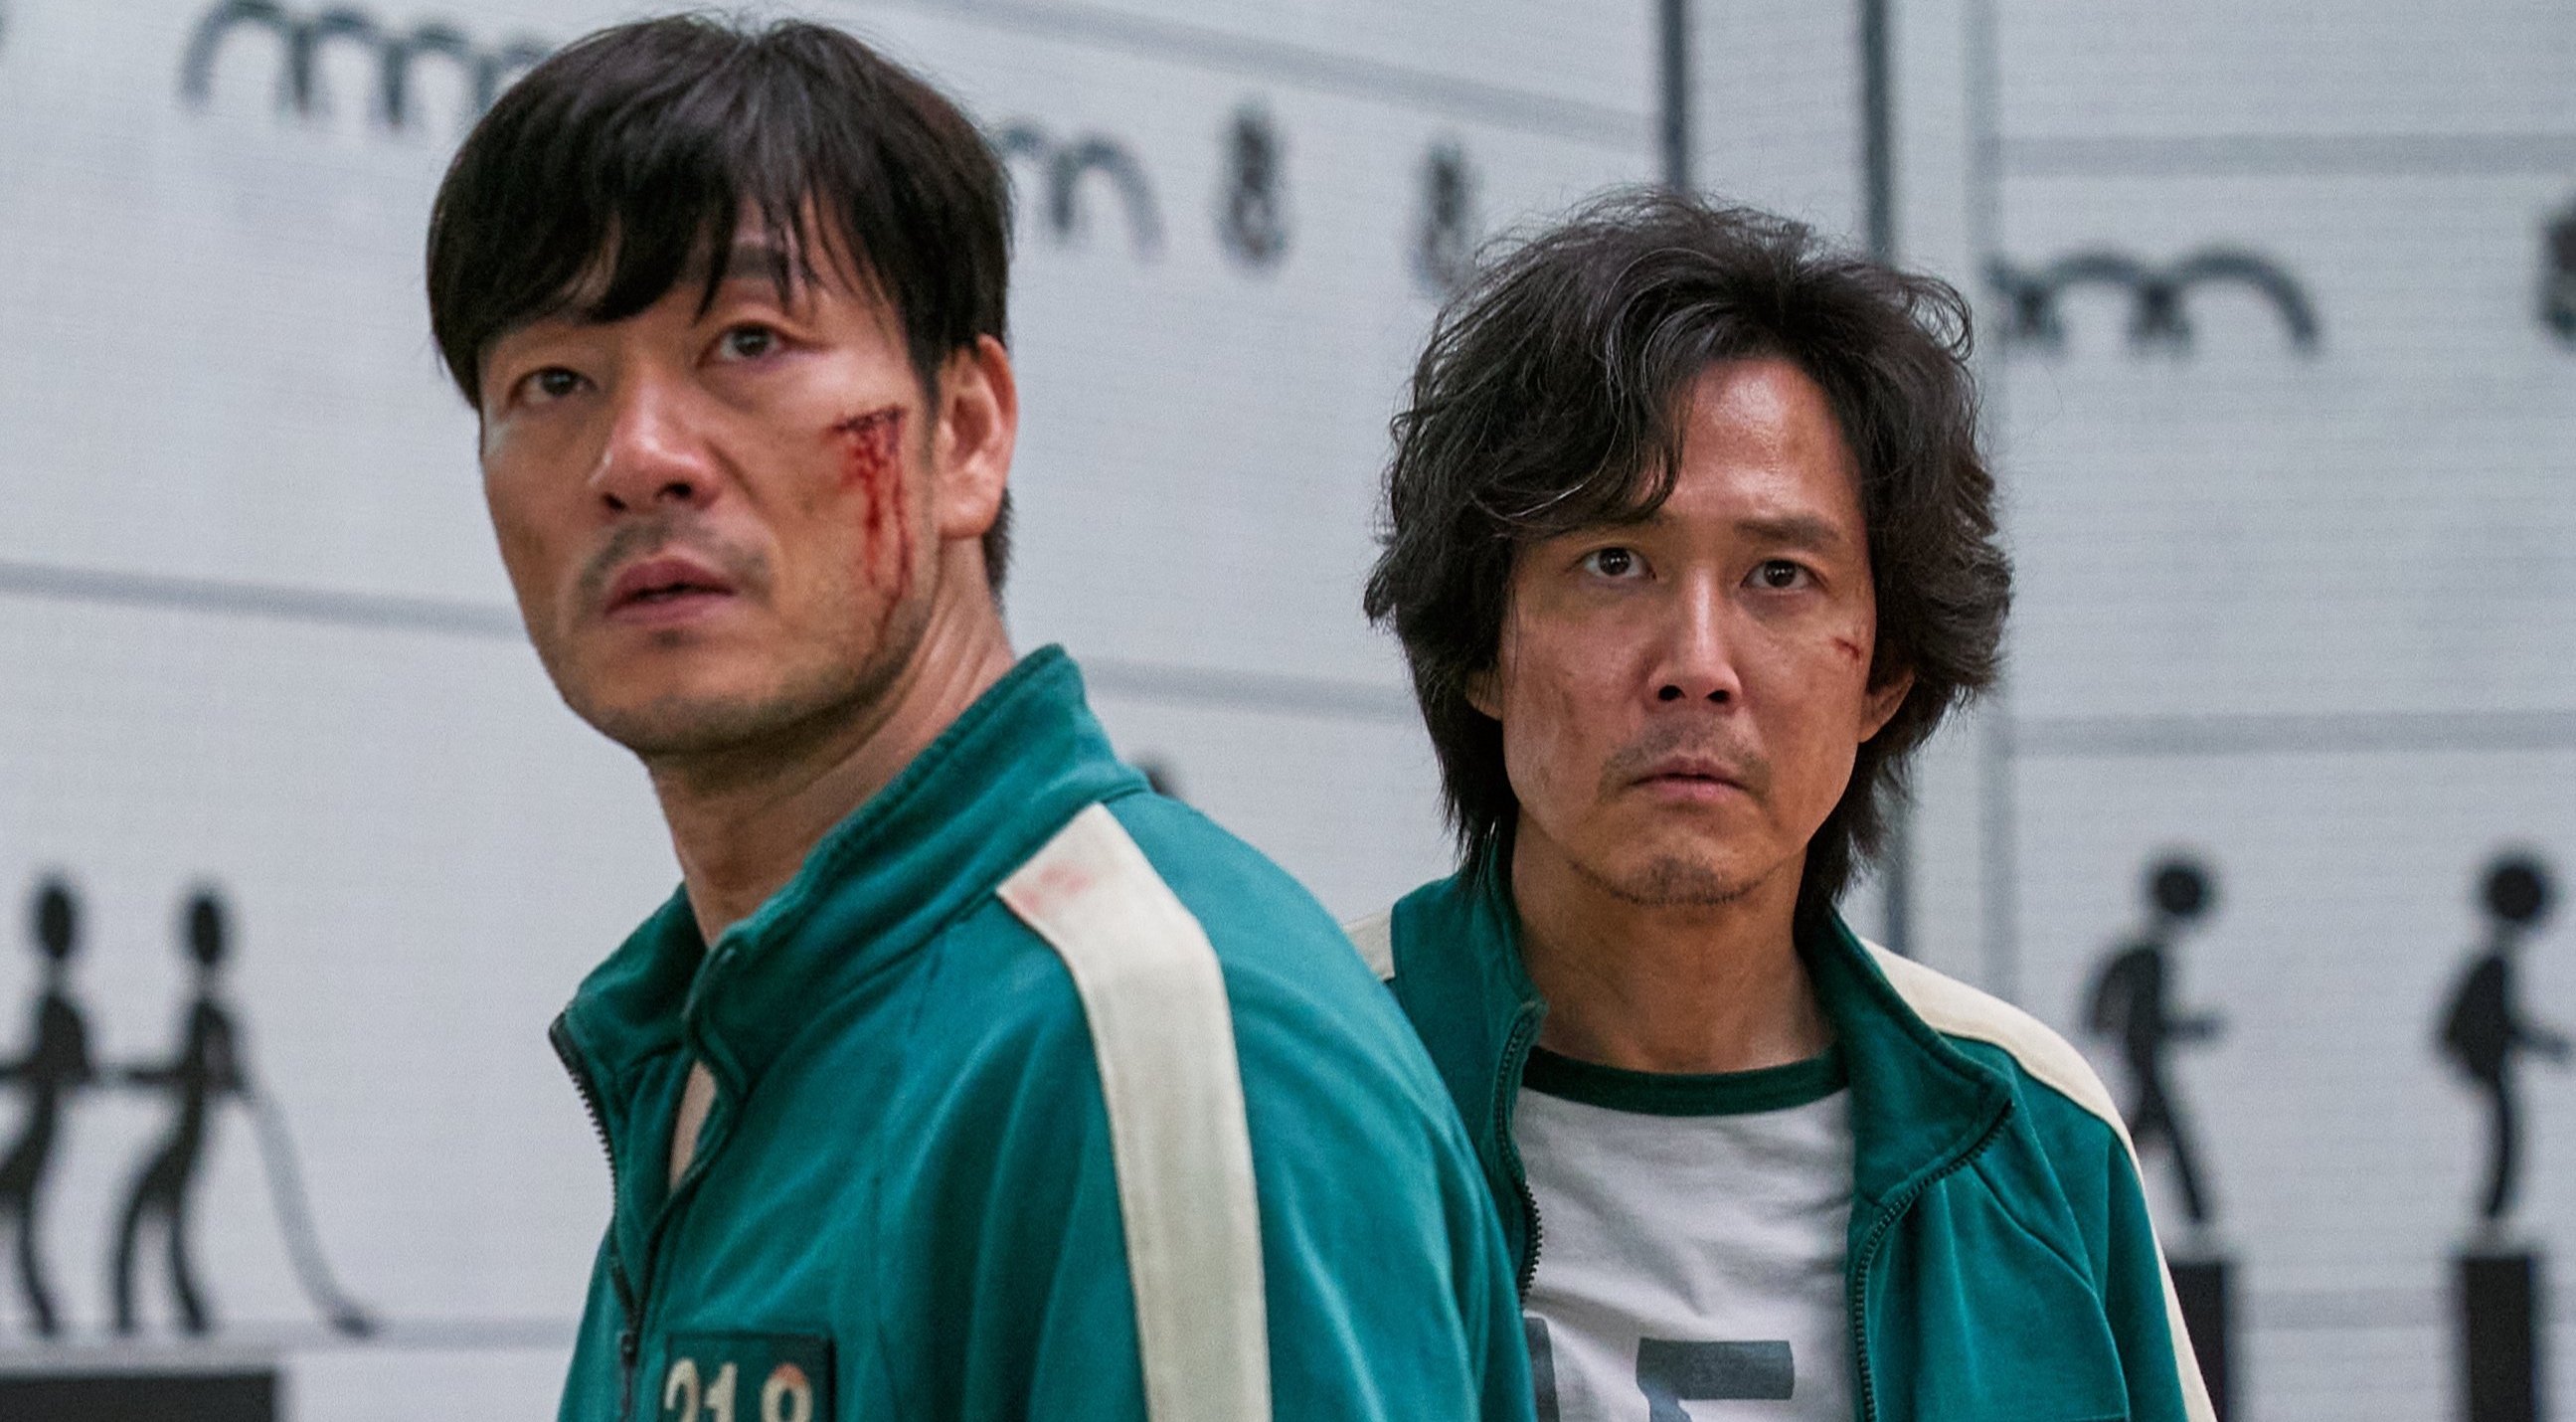 Characters Gi-Hun and Sang-Woo for Netflix's 'Squid Game' wearing green tracksuits with wounded face